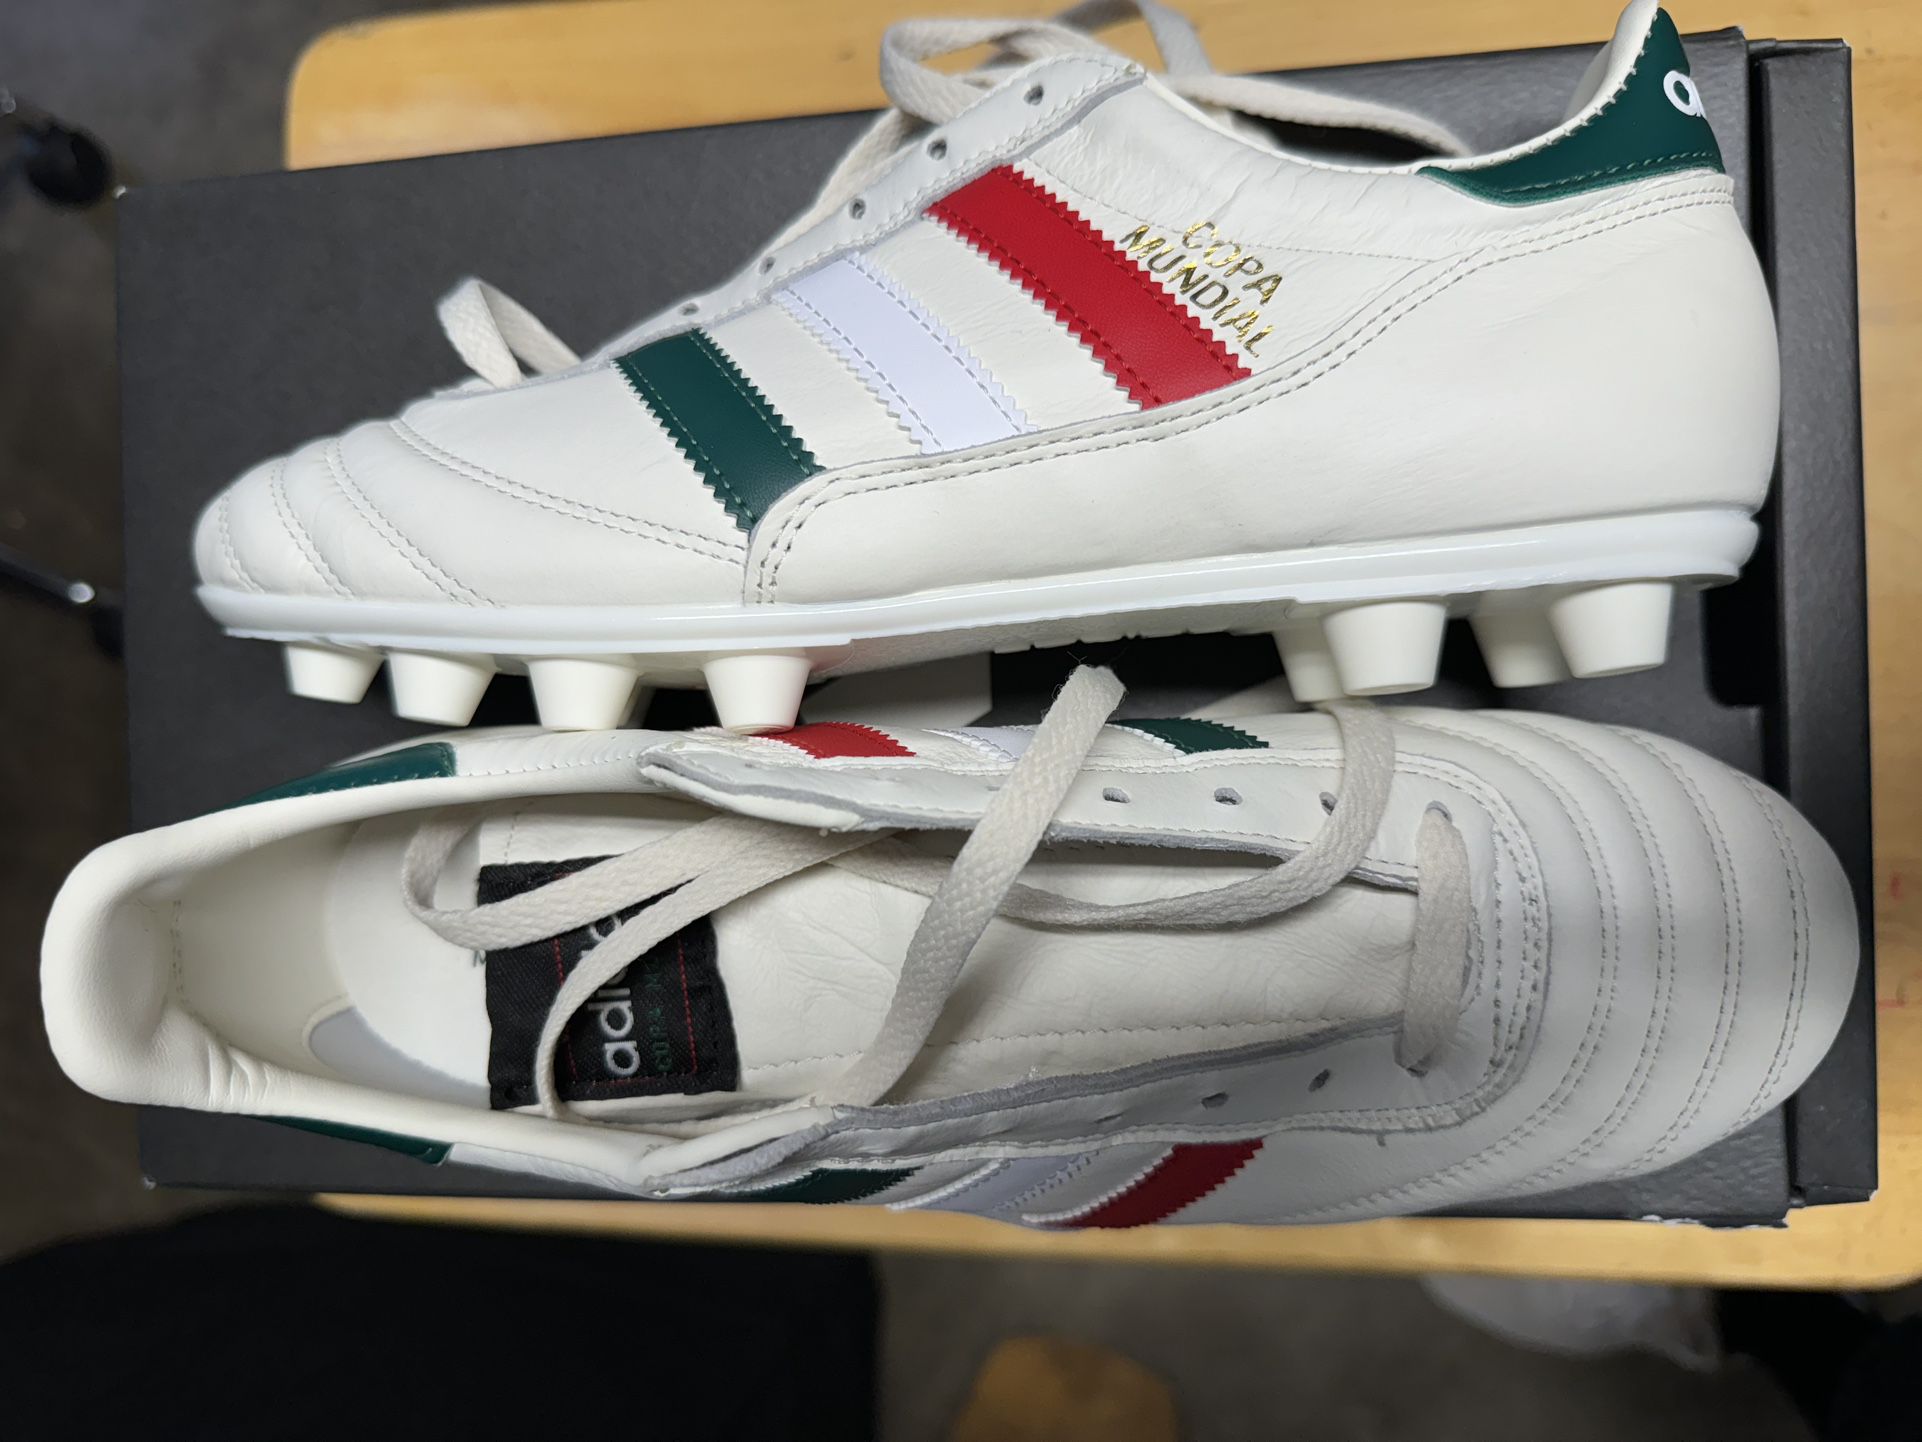 Adidas Copa Mundial Mexico Colorway Limited Edition Soccer Cleats 